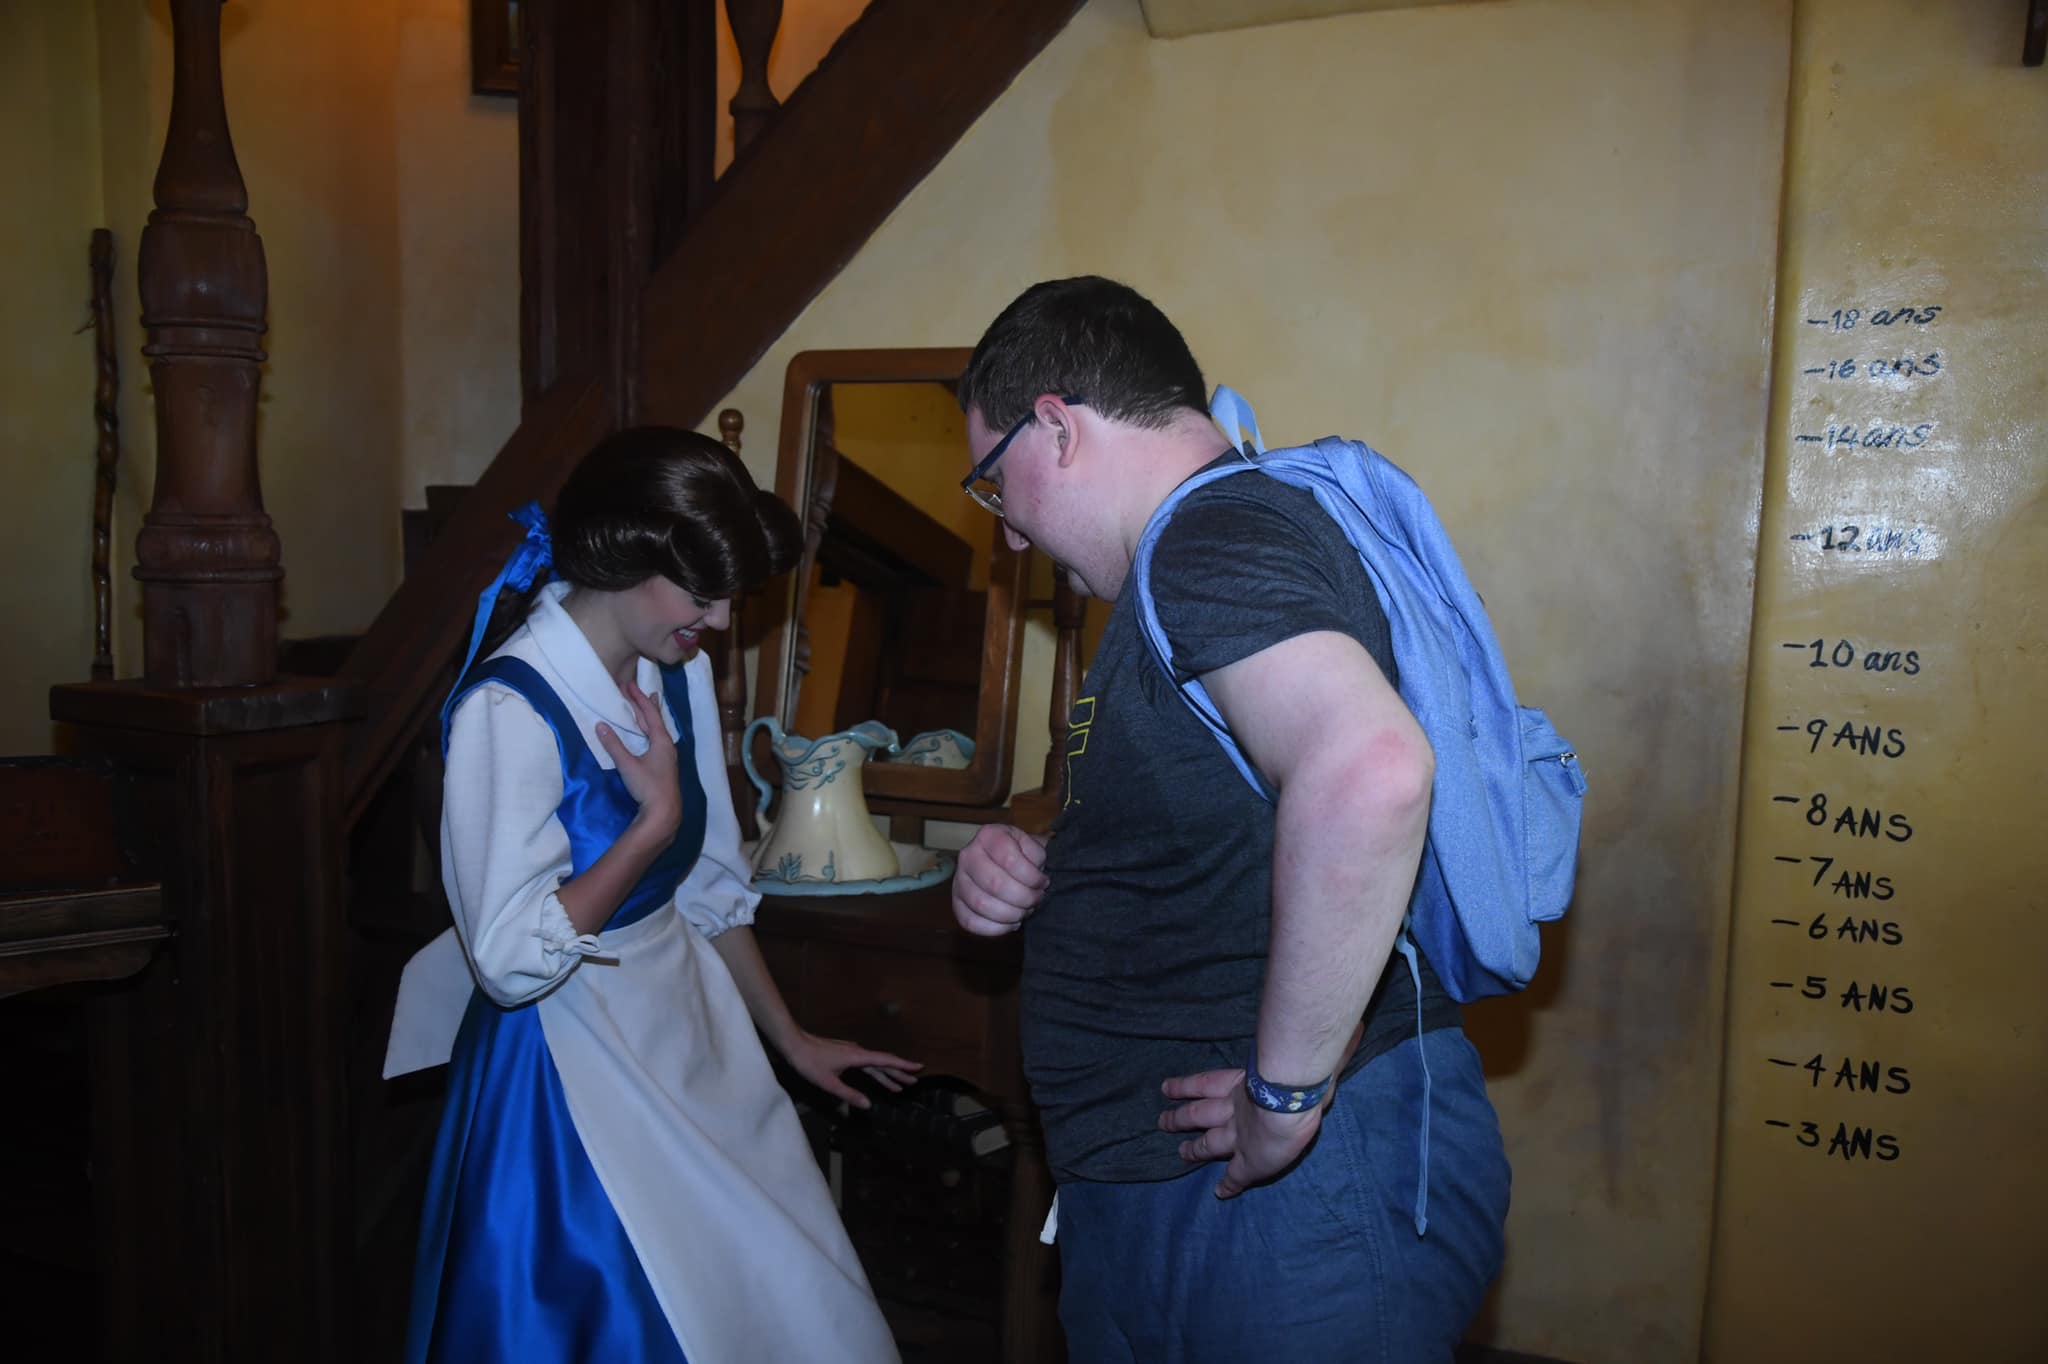 Belle and Myself having a Chat